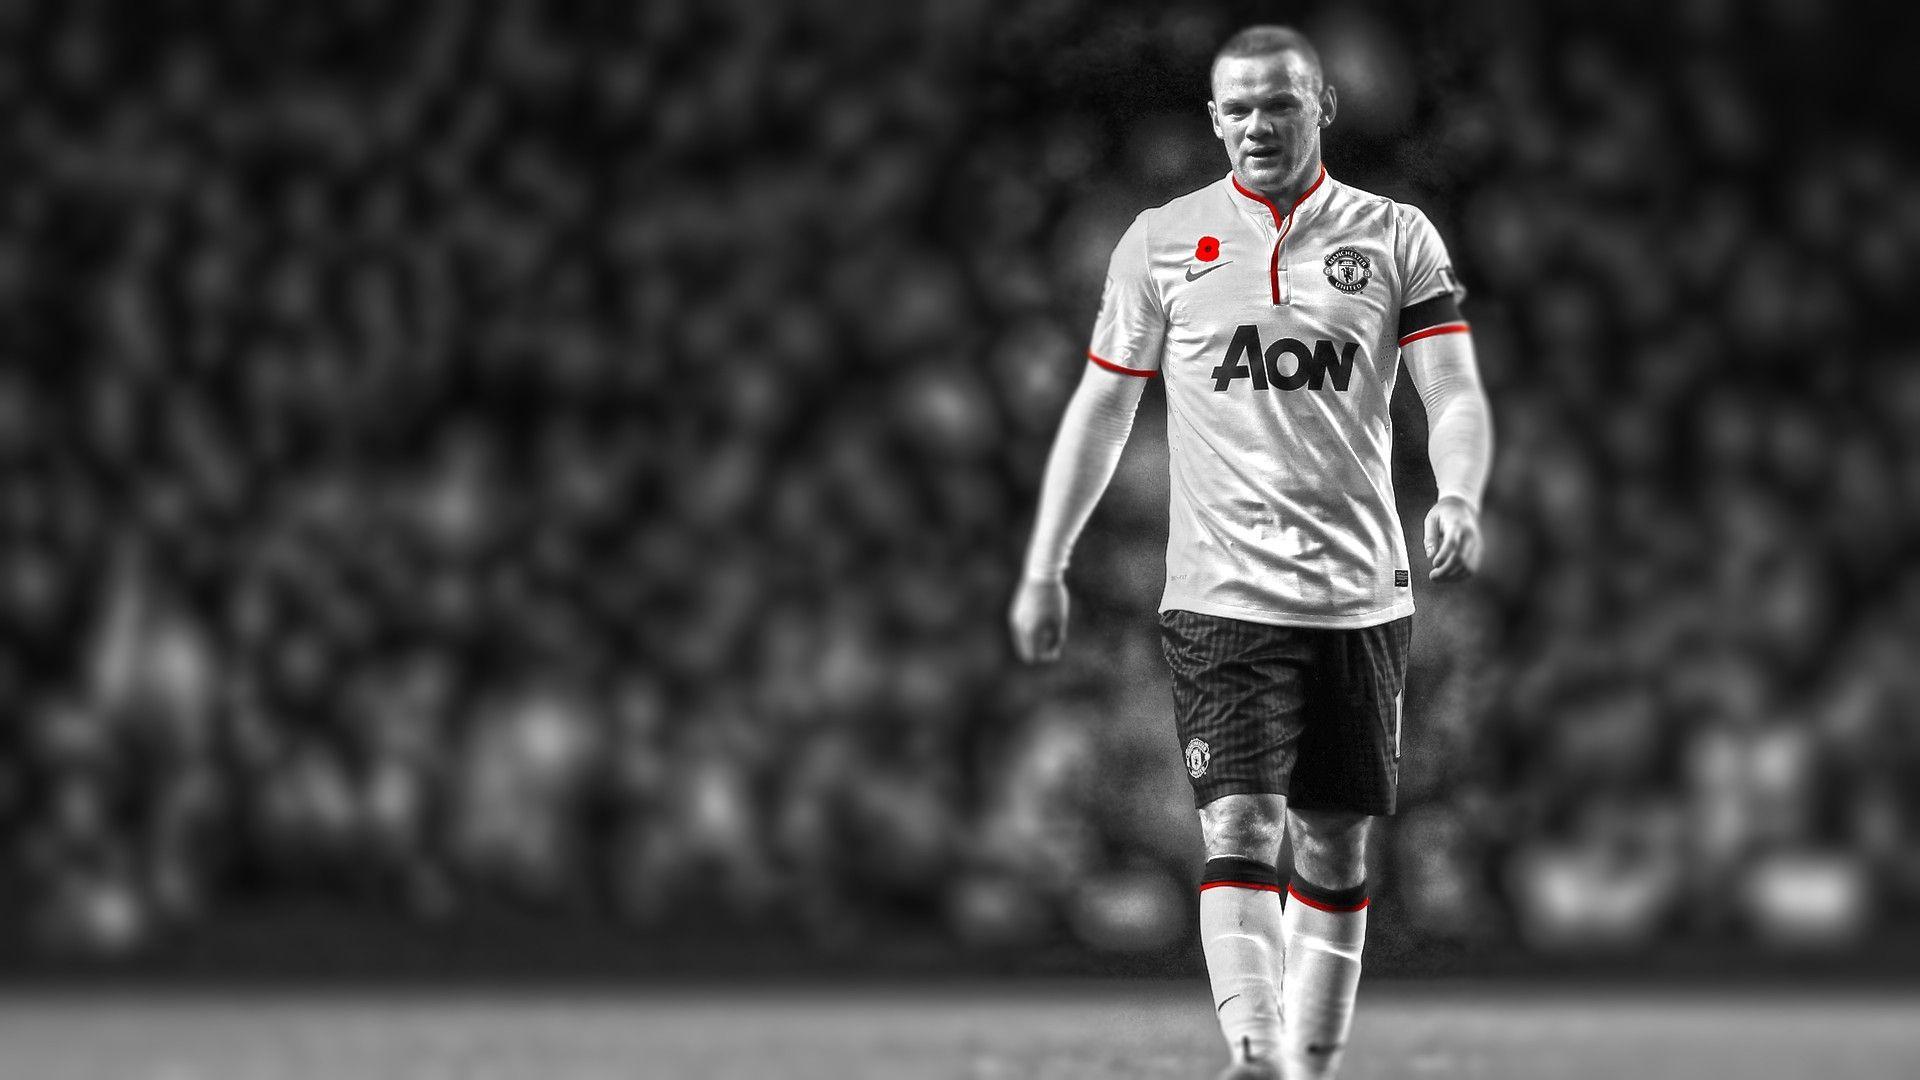 Wayne Rooney is a Celeb who has started to show signs of significant